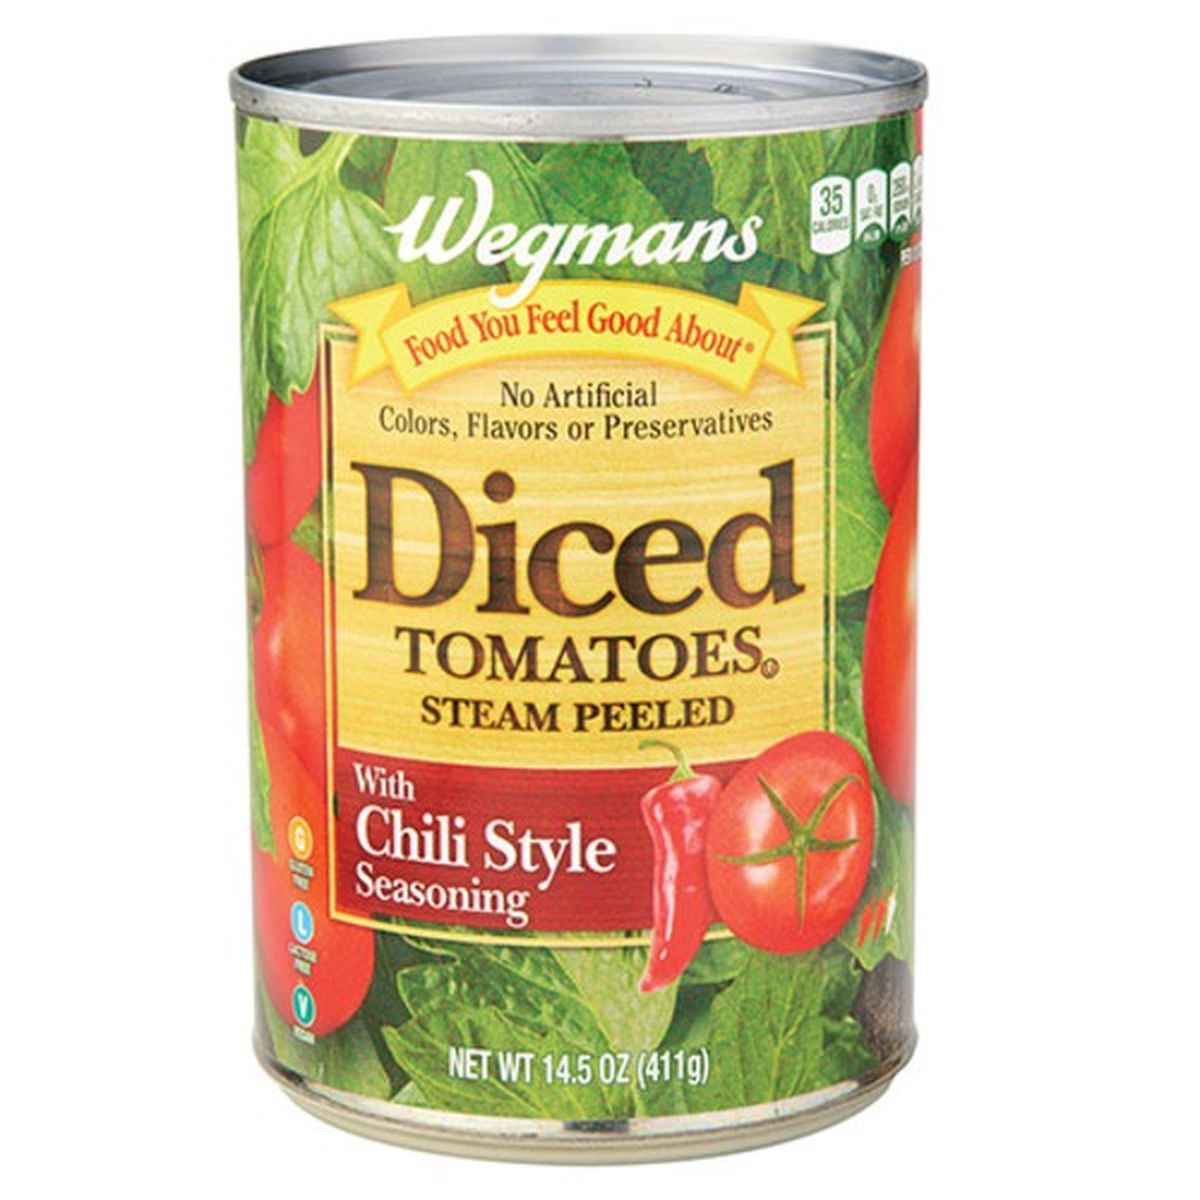 Calories in Wegmans Diced Tomatoes with Chili Style Seasoning